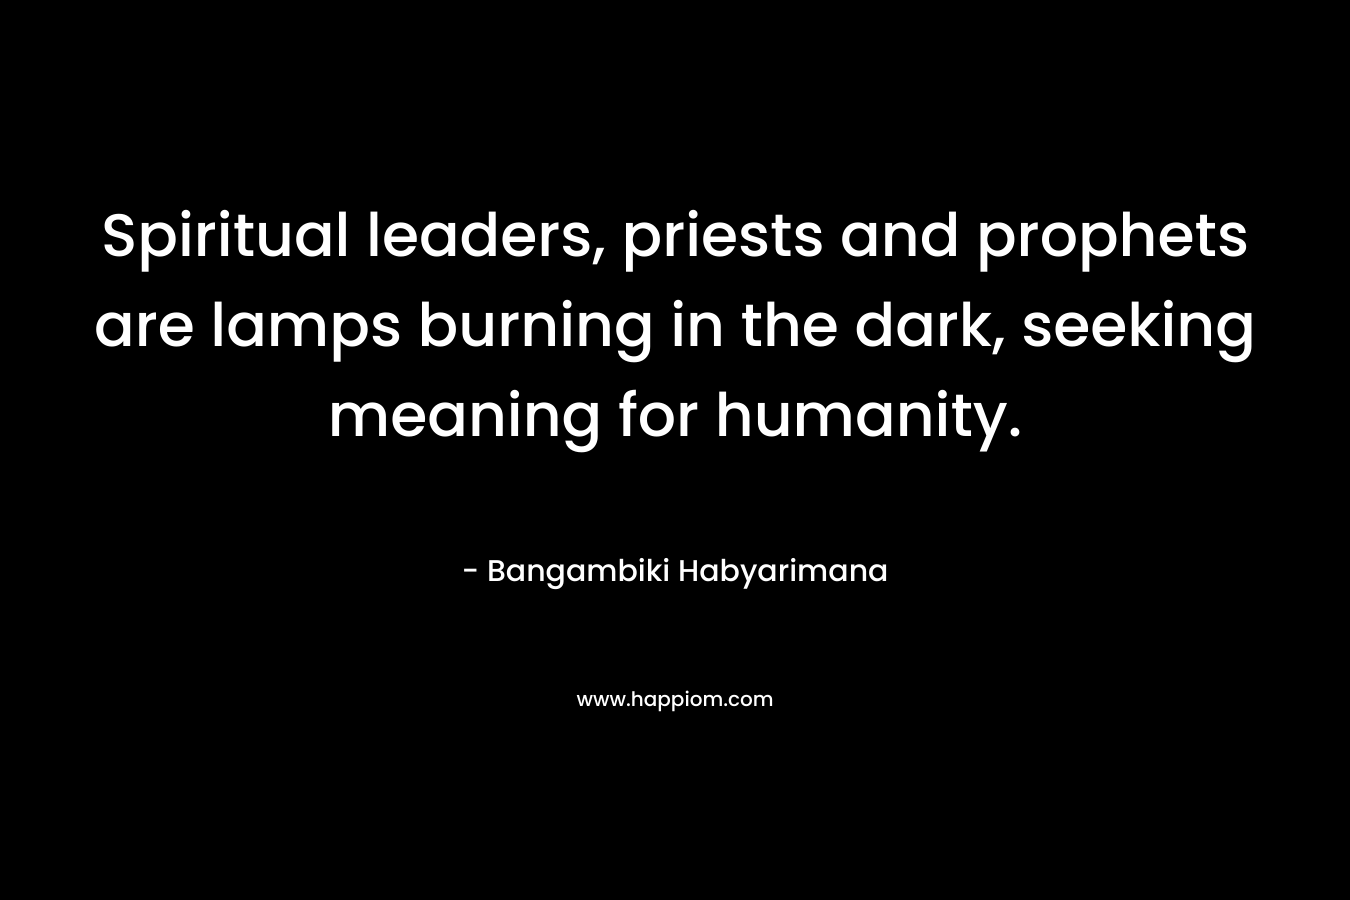 Spiritual leaders, priests and prophets are lamps burning in the dark, seeking meaning for humanity. – Bangambiki Habyarimana